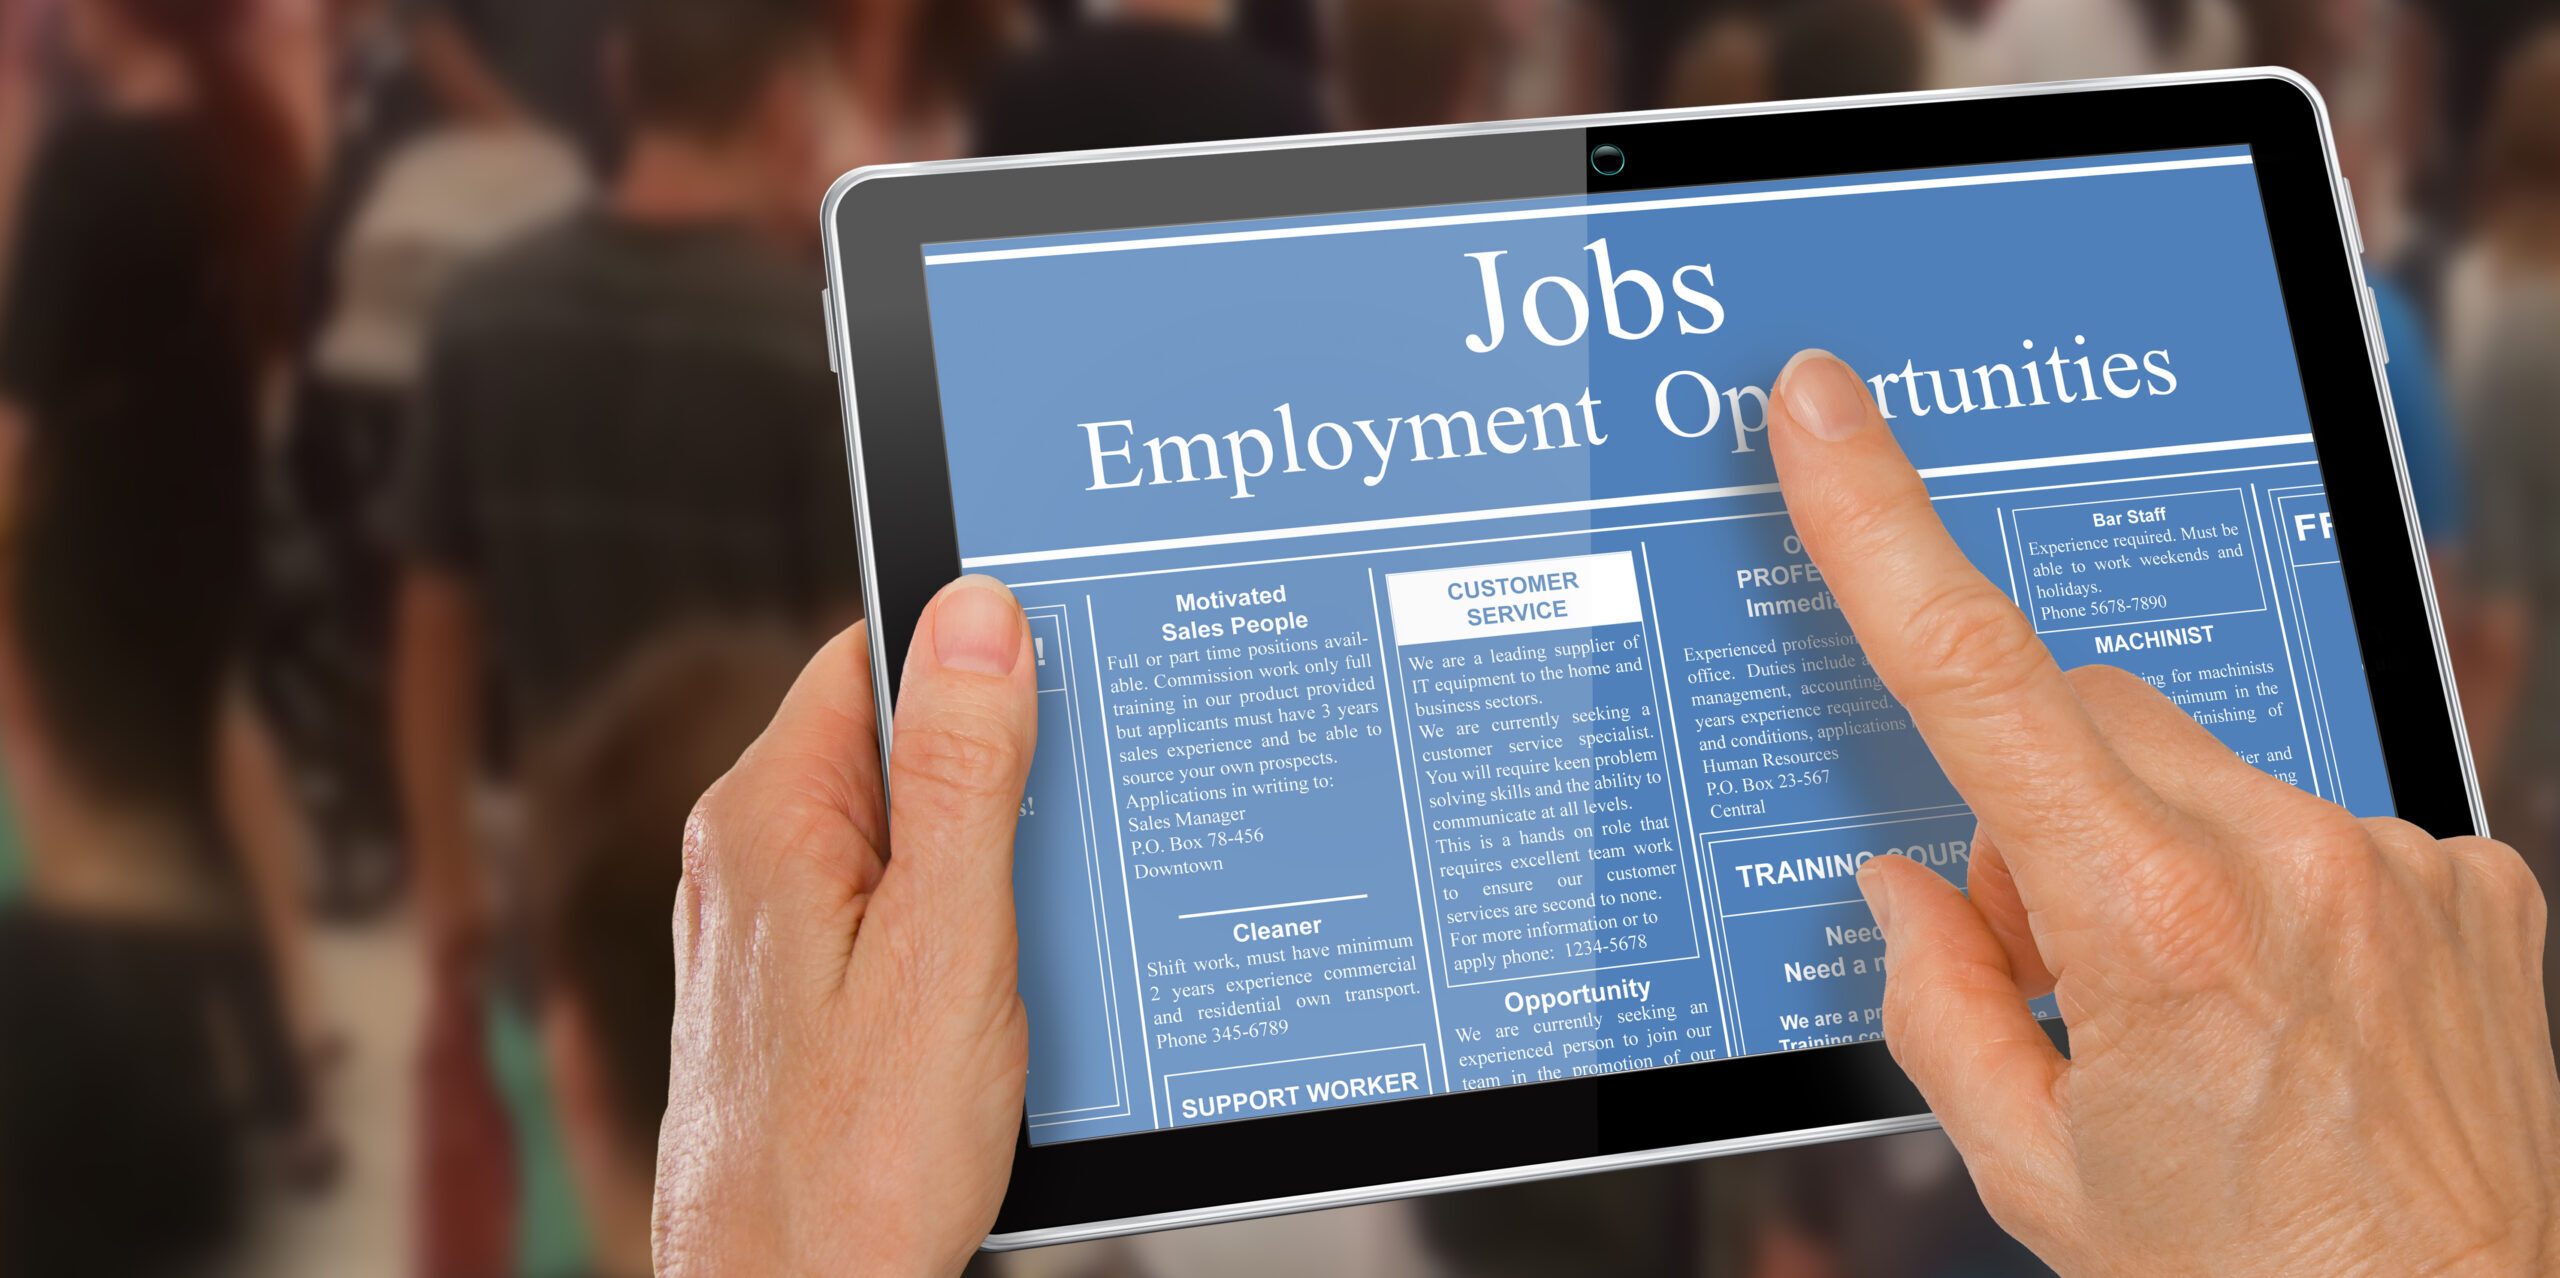 FREE Positions Vacant & Candidates Seeking Employment Advertisements